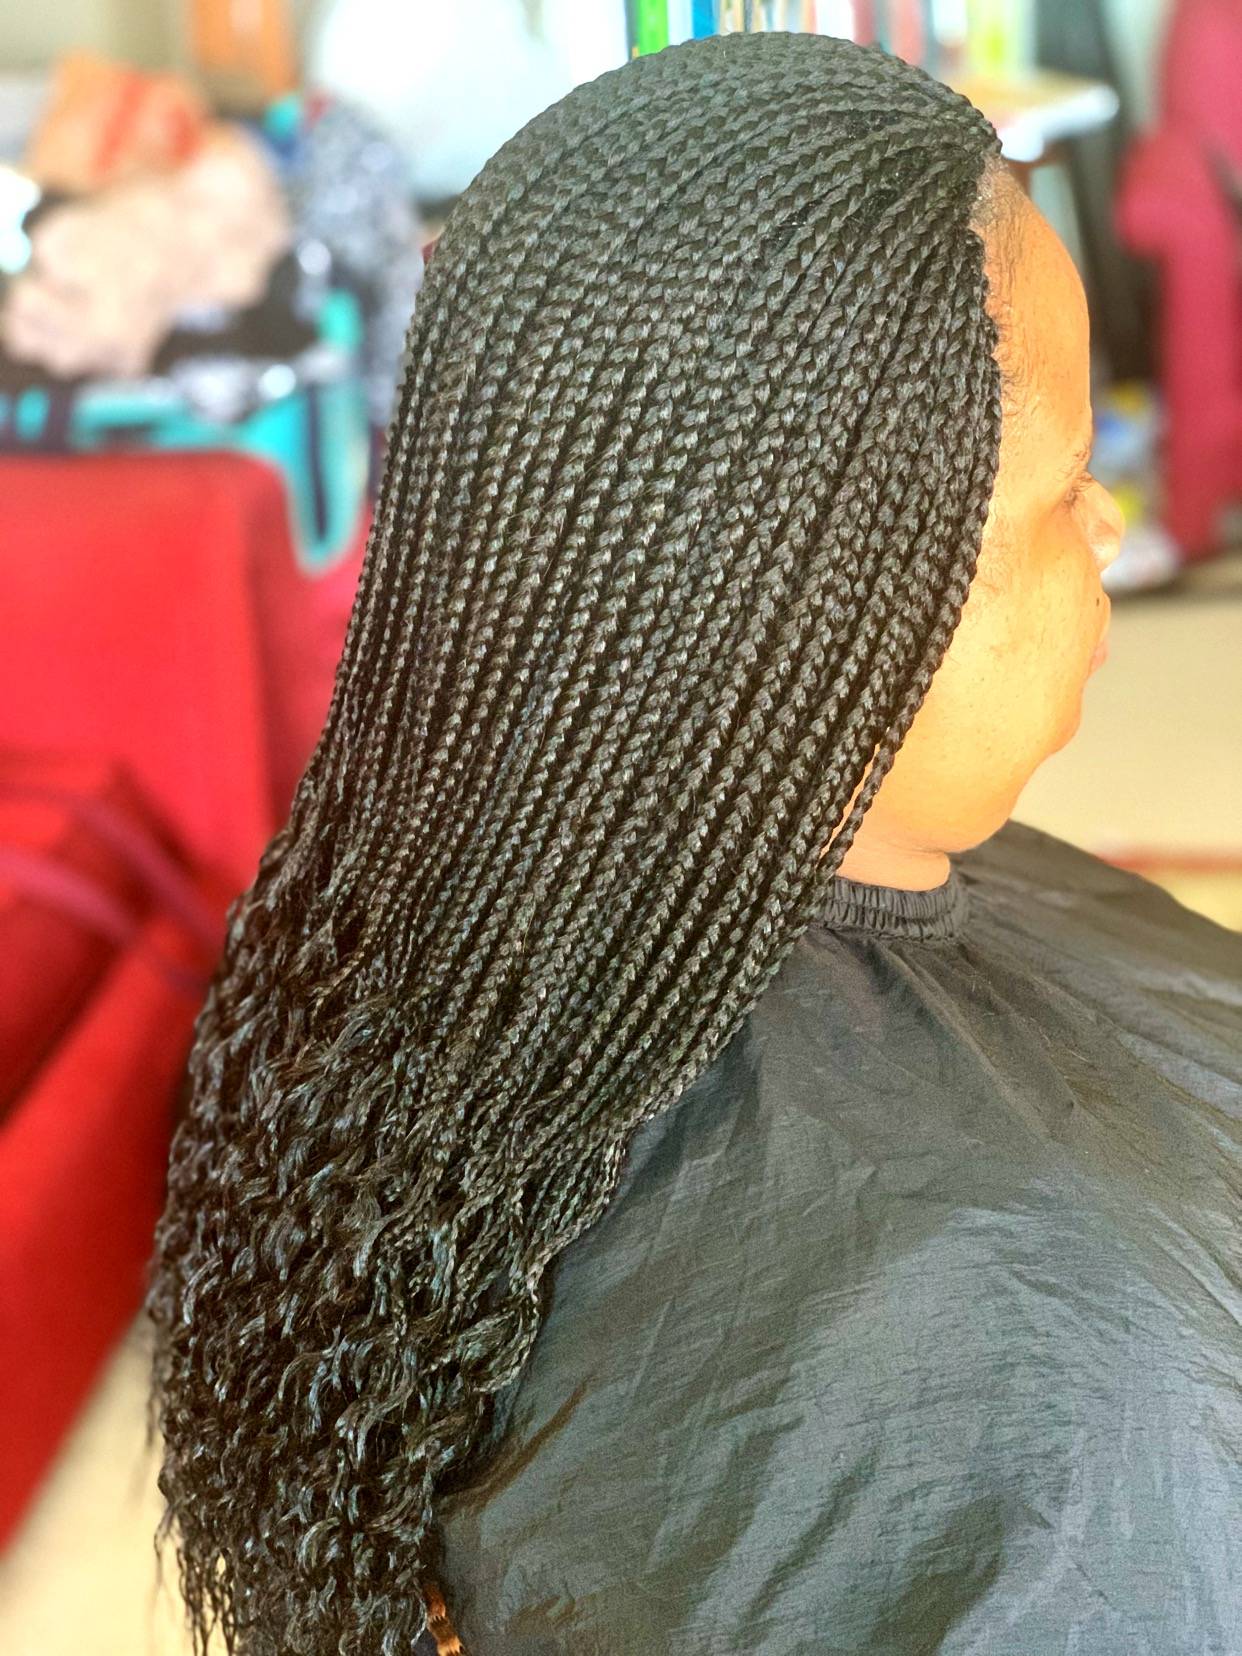 Small Individual braids completed in Alexandria, VA